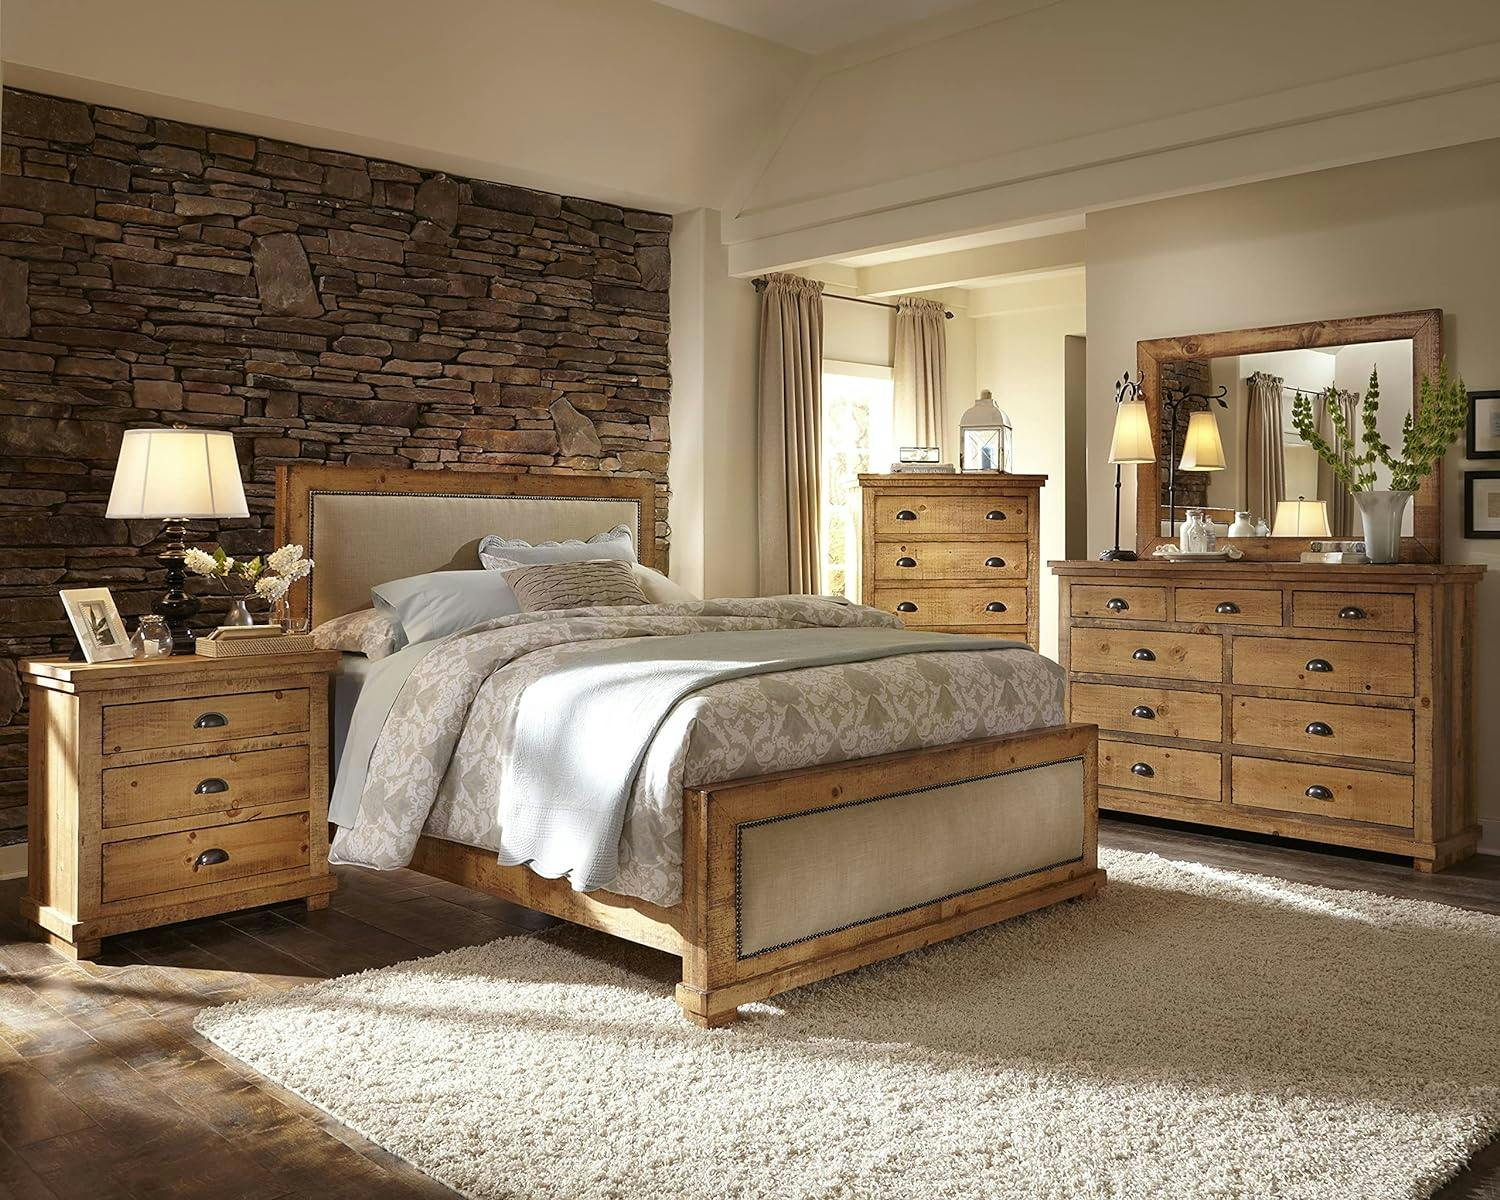 Rustic Pine King Bed with Nailhead Trim Upholstered Headboard